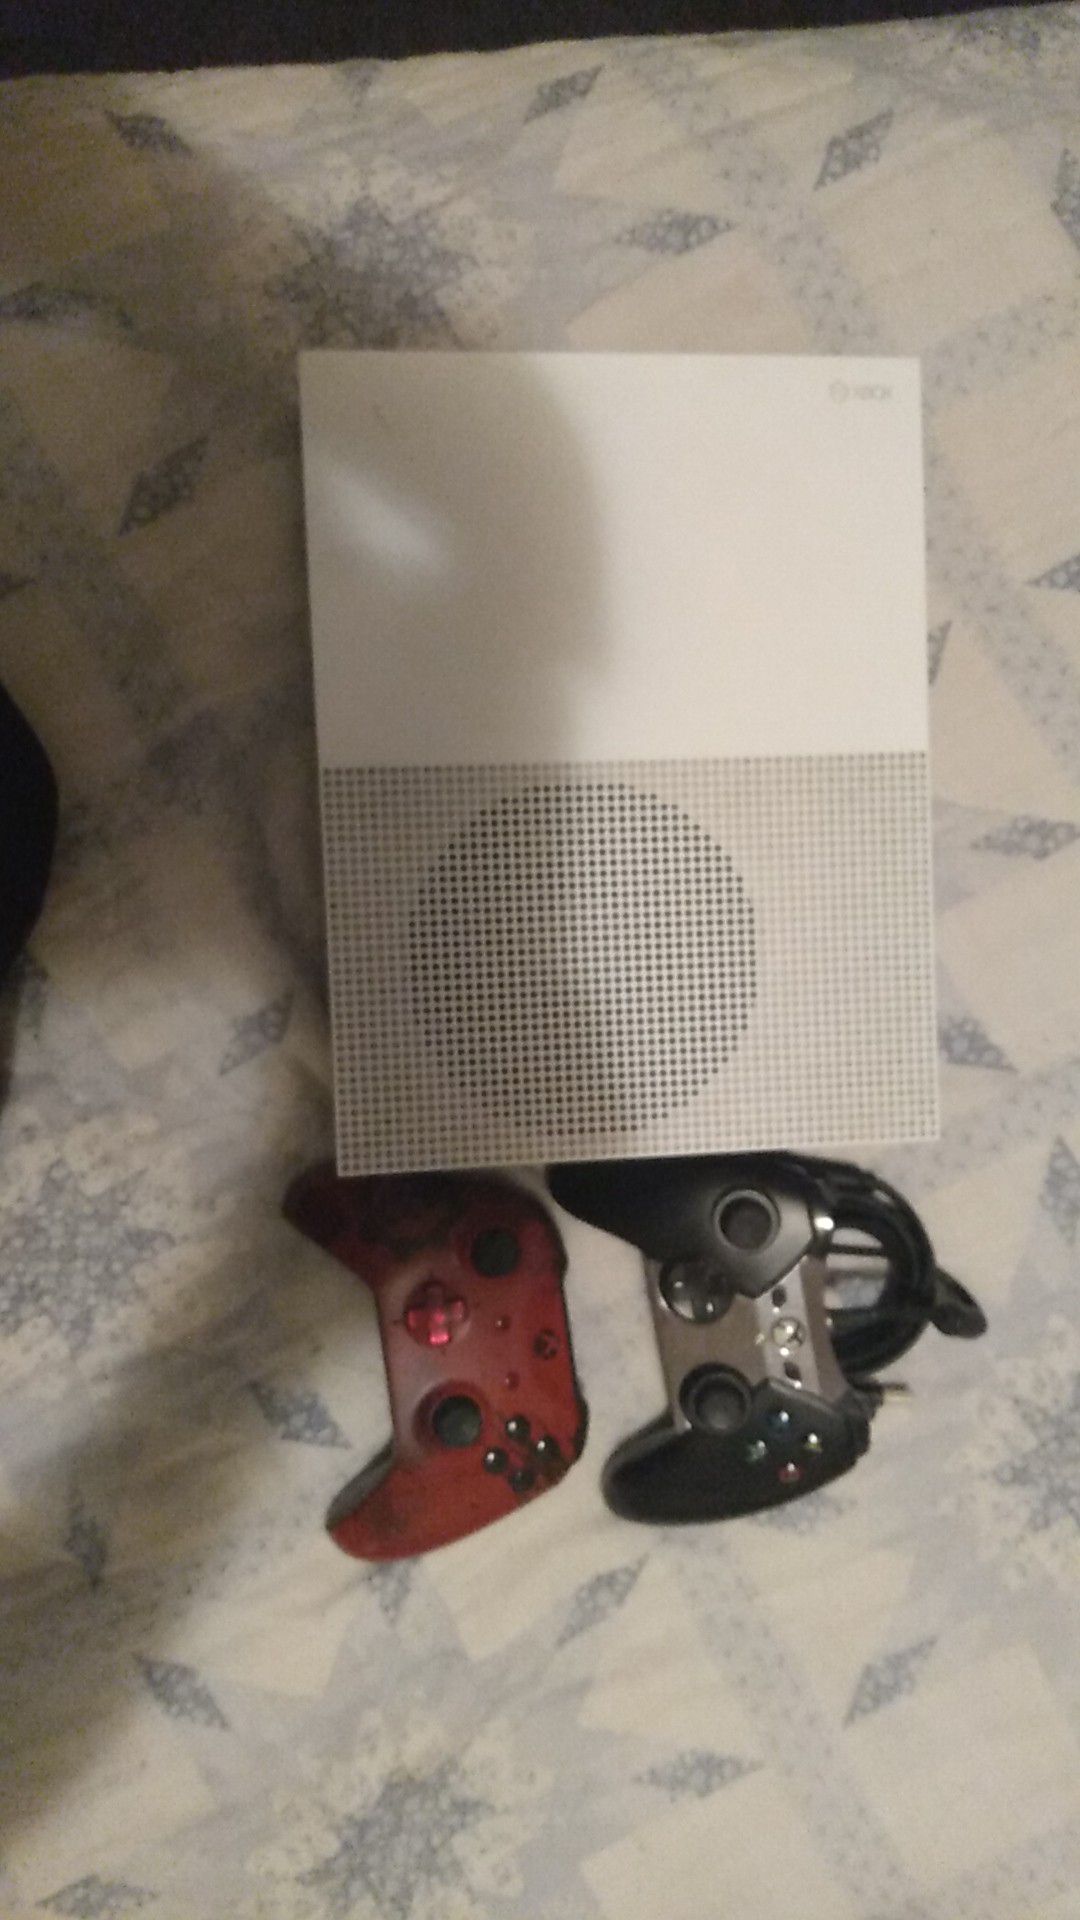 Xbox one s with one wired controller a one sided turtle Beach headset